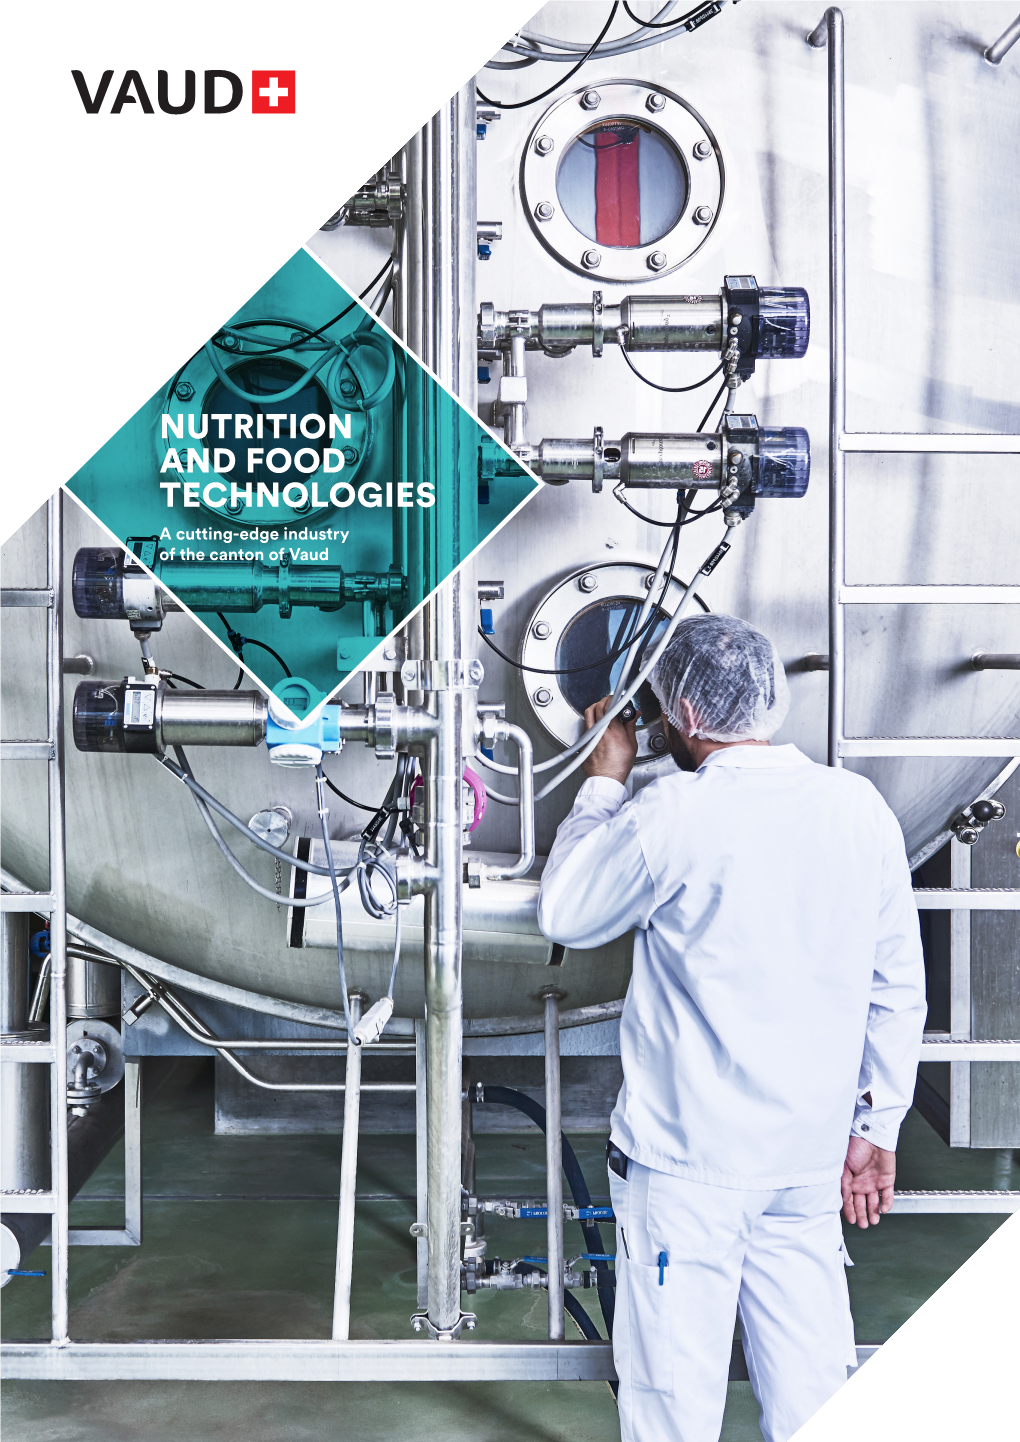 NUTRITION and FOOD TECHNOLOGIES a Cutting-Edge Industry of the Canton of Vaud 2 VAUD ECONOMIC PROMOTION / NUTRITION and FOOD TECHNOLOGIES